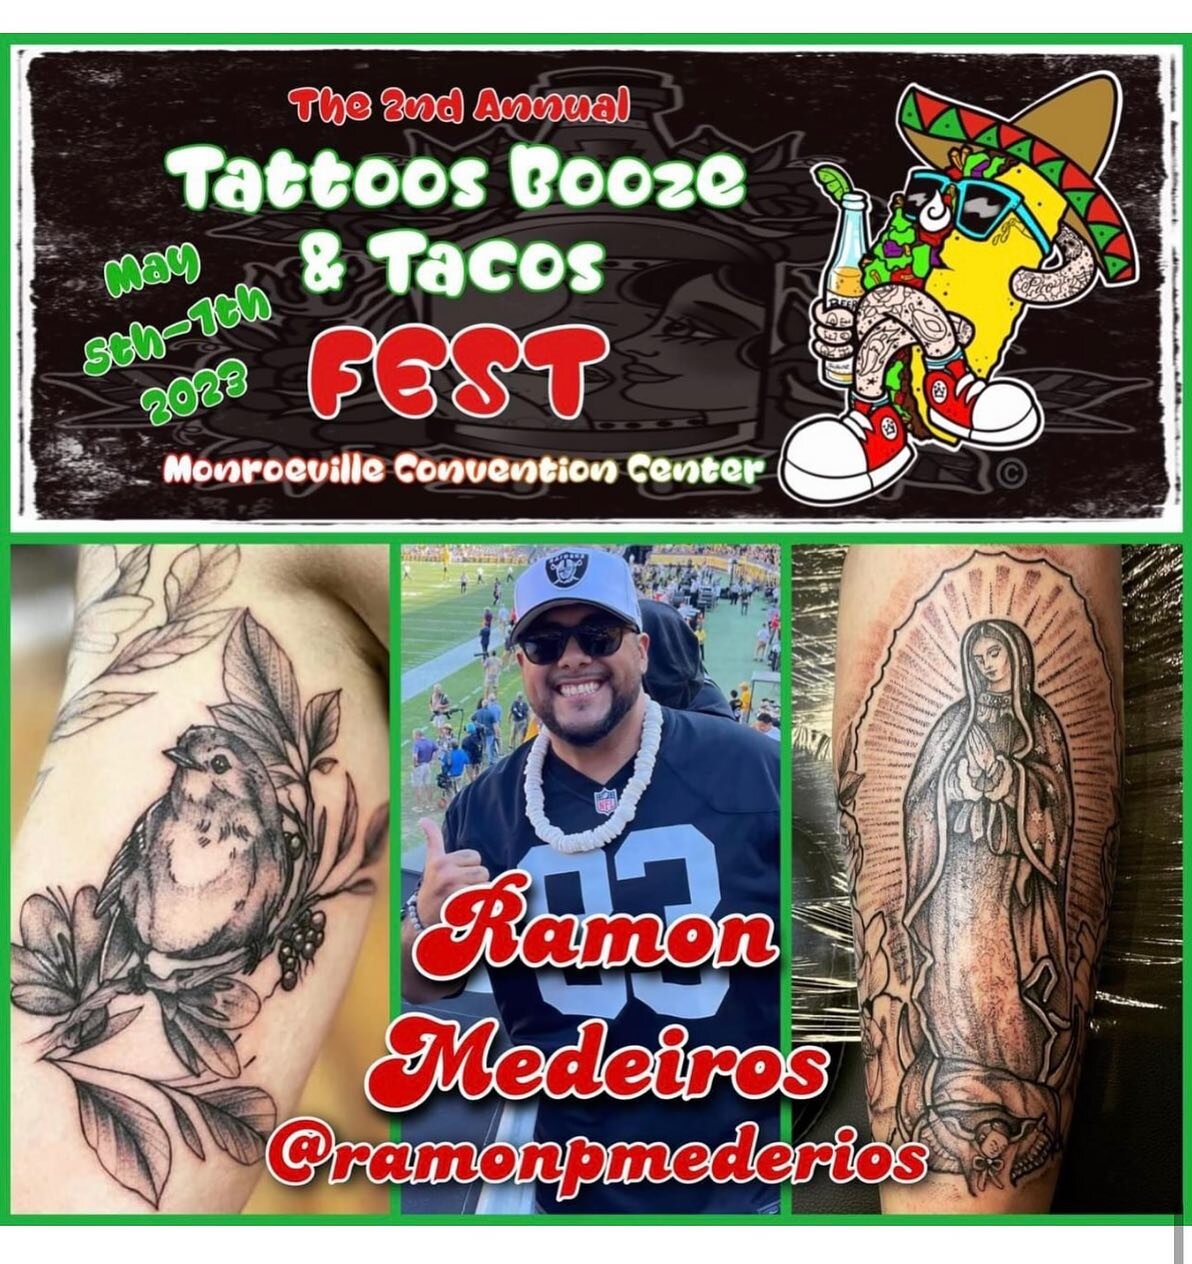 Come see @ramonpmedeiros &amp; Black Oak Artistry at our booth at this years convention in Monroeville. 
@tattoos_booze_tacos_fest May 5,6,7. Flash designs, custom designs and a giveaway 👍